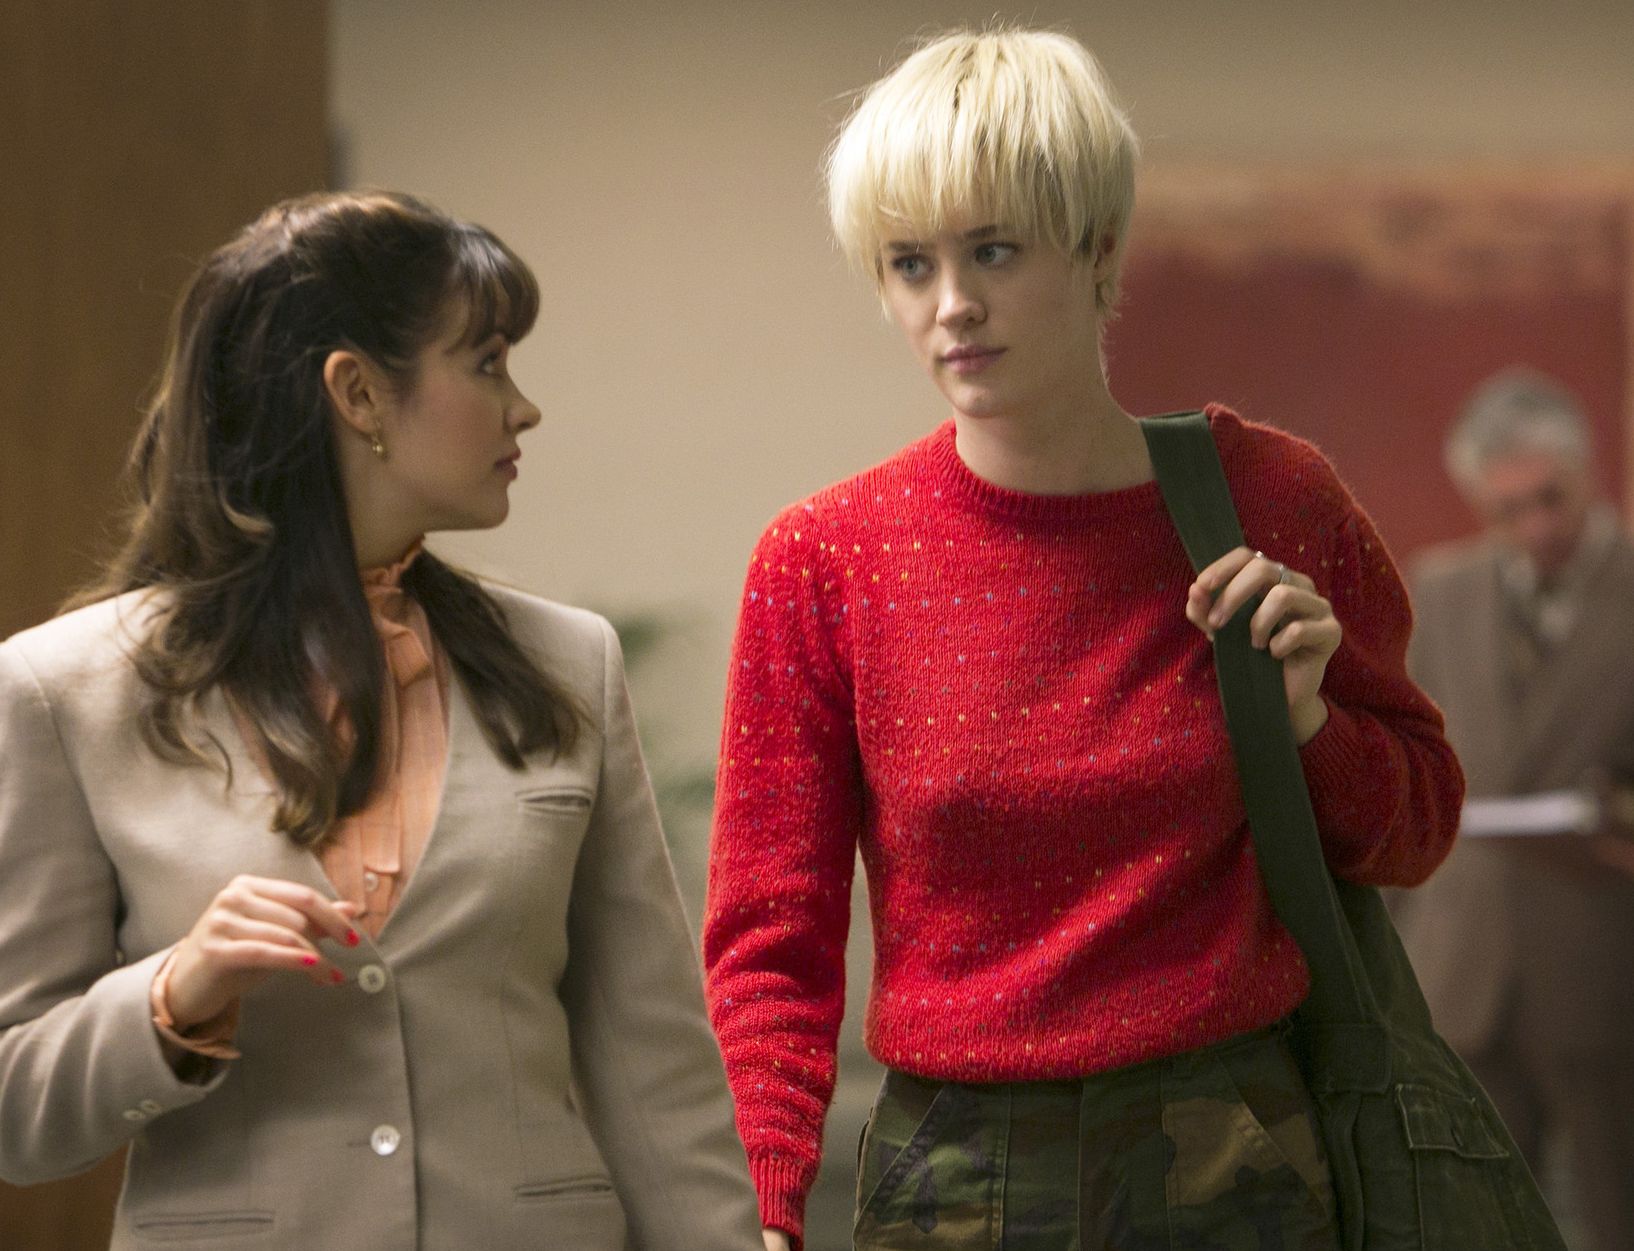 Cameron Howe gets some critique on her sweater in Halt and C